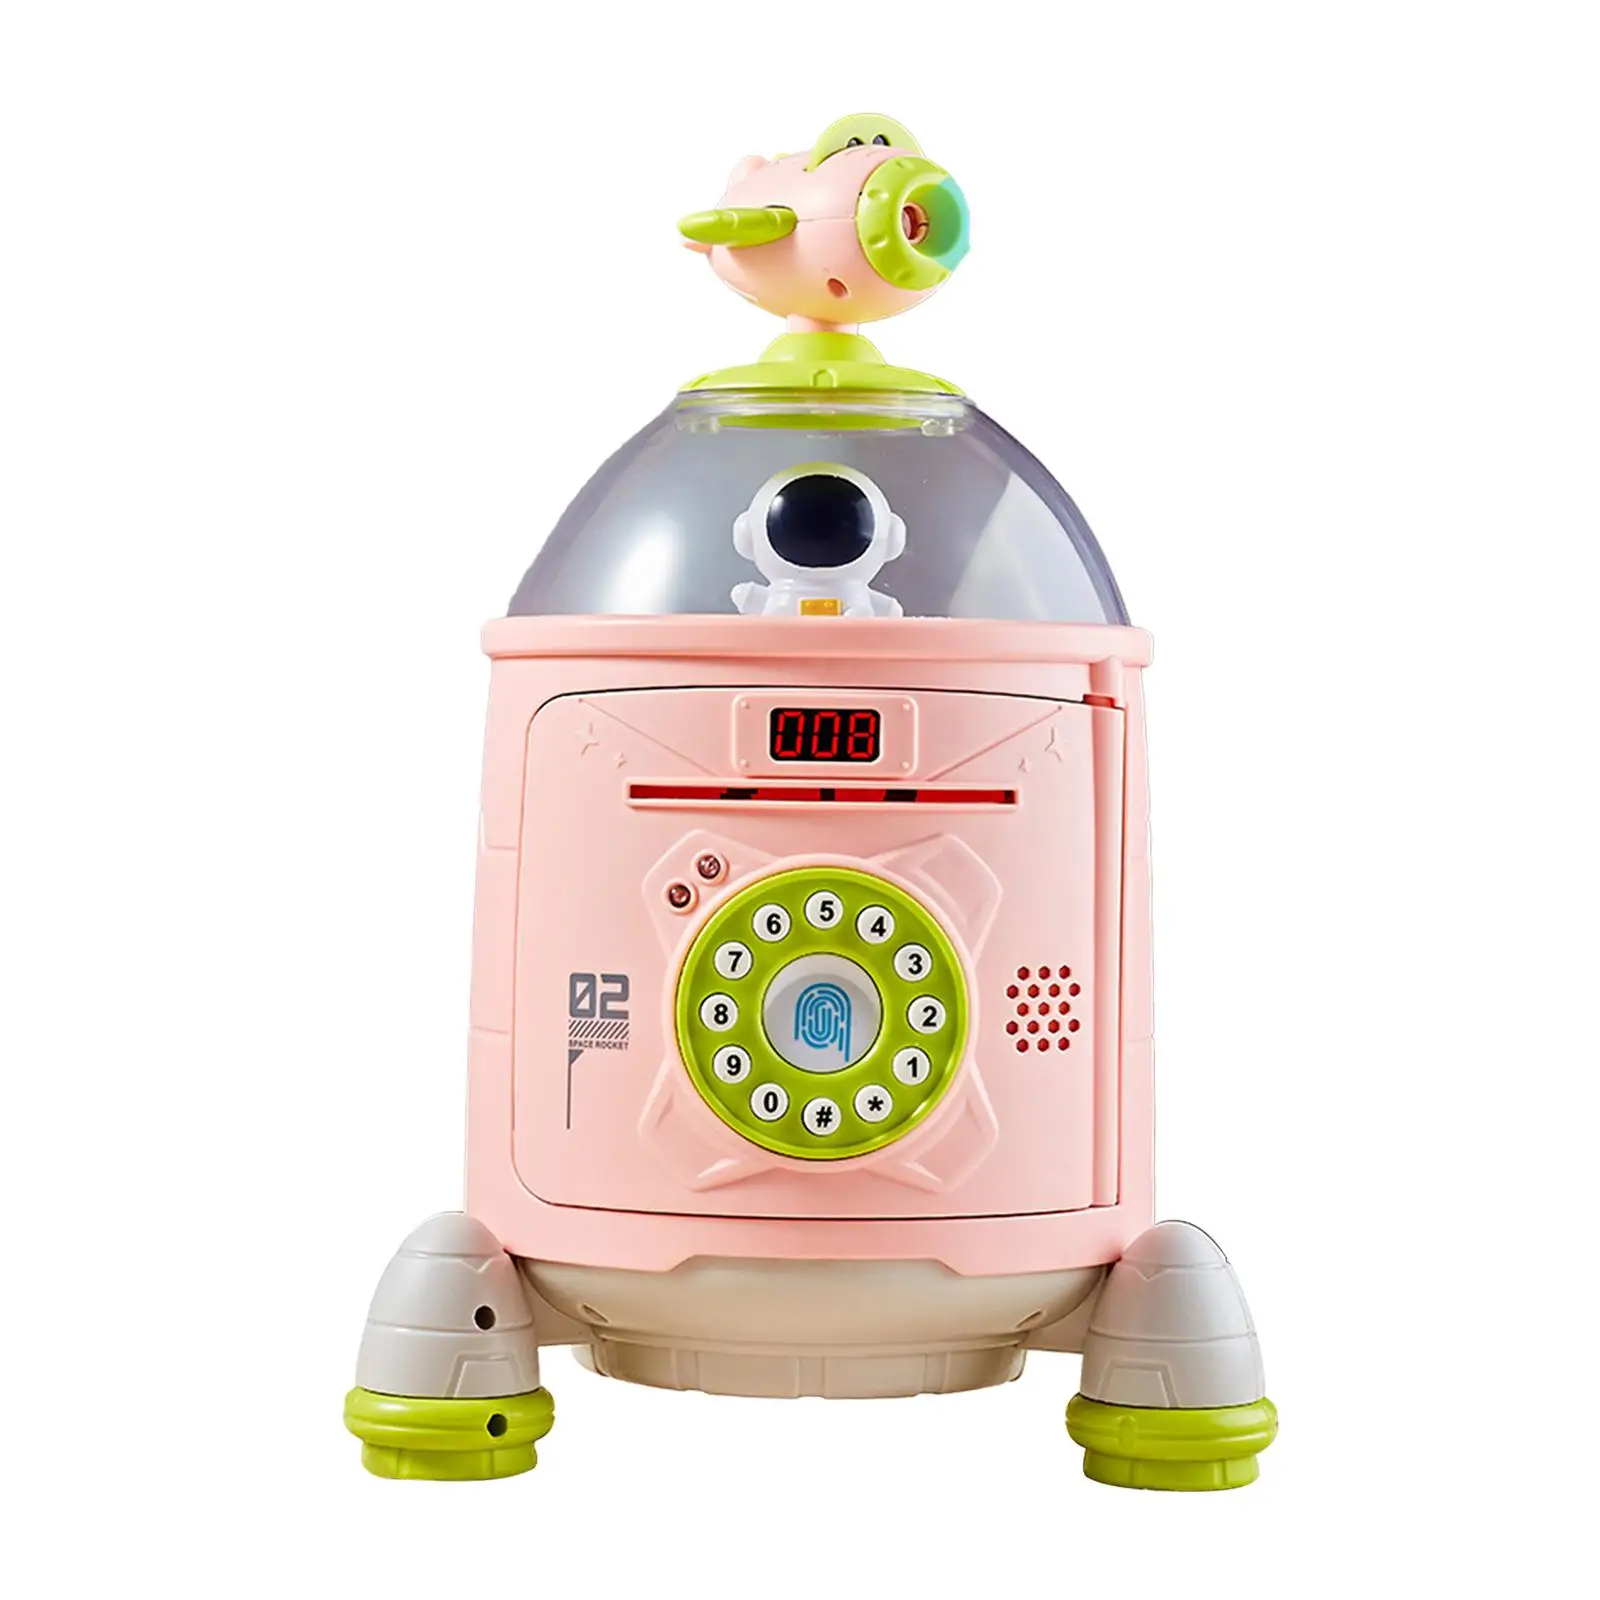 Rocket Piggy Bank Creative Party Favor Money Savings Bank Home Decoration Safe Educational Toy for Adults Age 3-8 Years Children